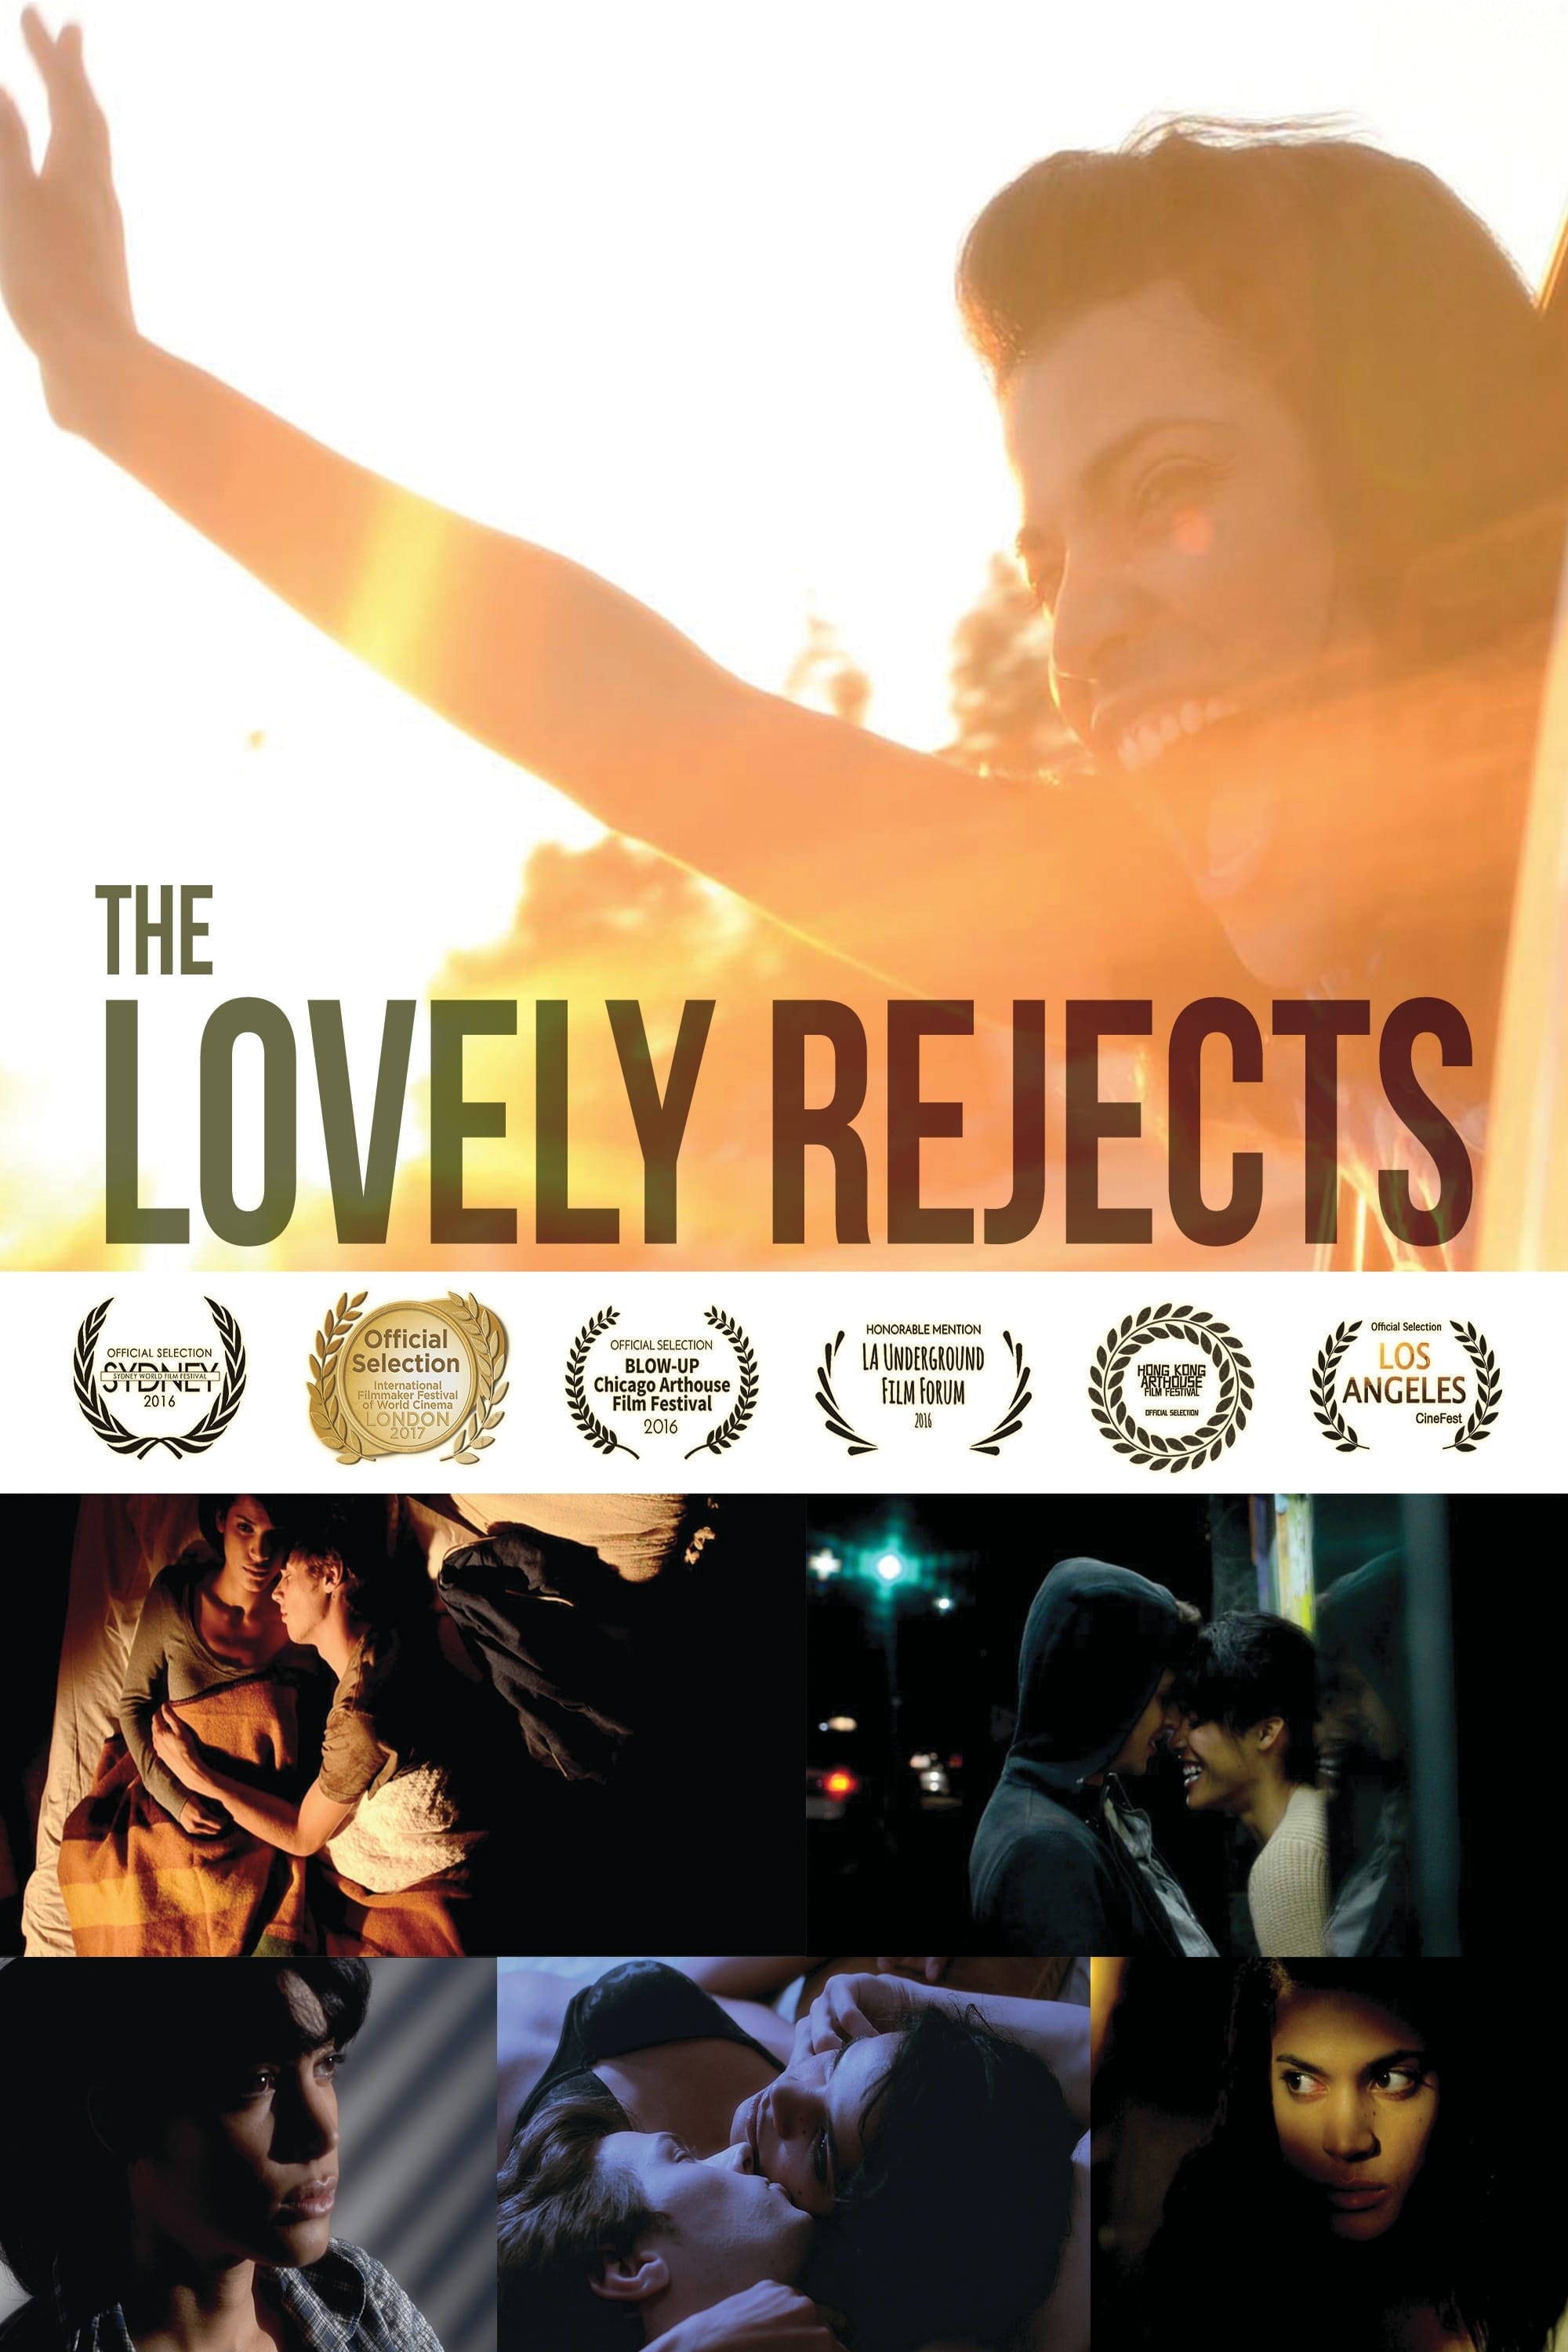 The Lovely Rejects